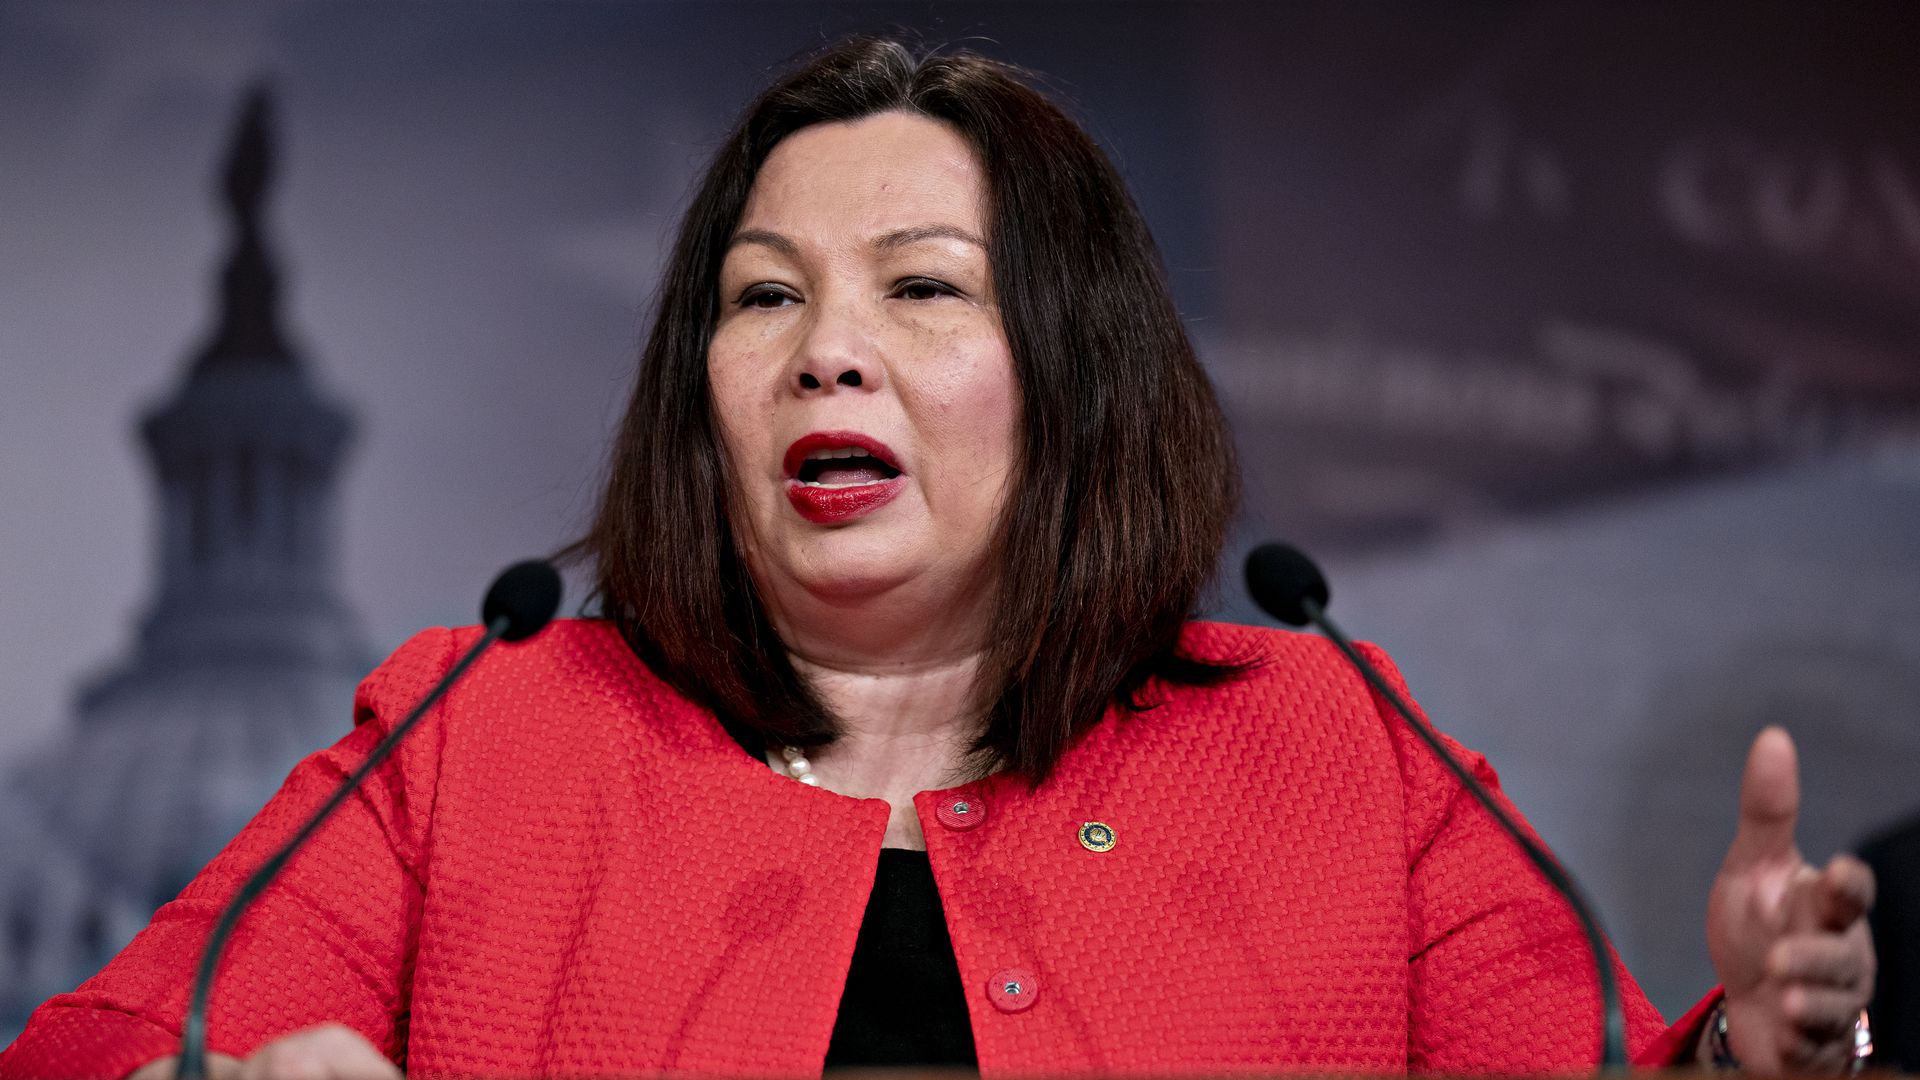 Senator Tammy Duckworth, a Democrat from Illinois, speaks during a news conference at the U.S. Capitol in Washington, D.C., U.S, on Thursday, Feb. 13, 2020. 